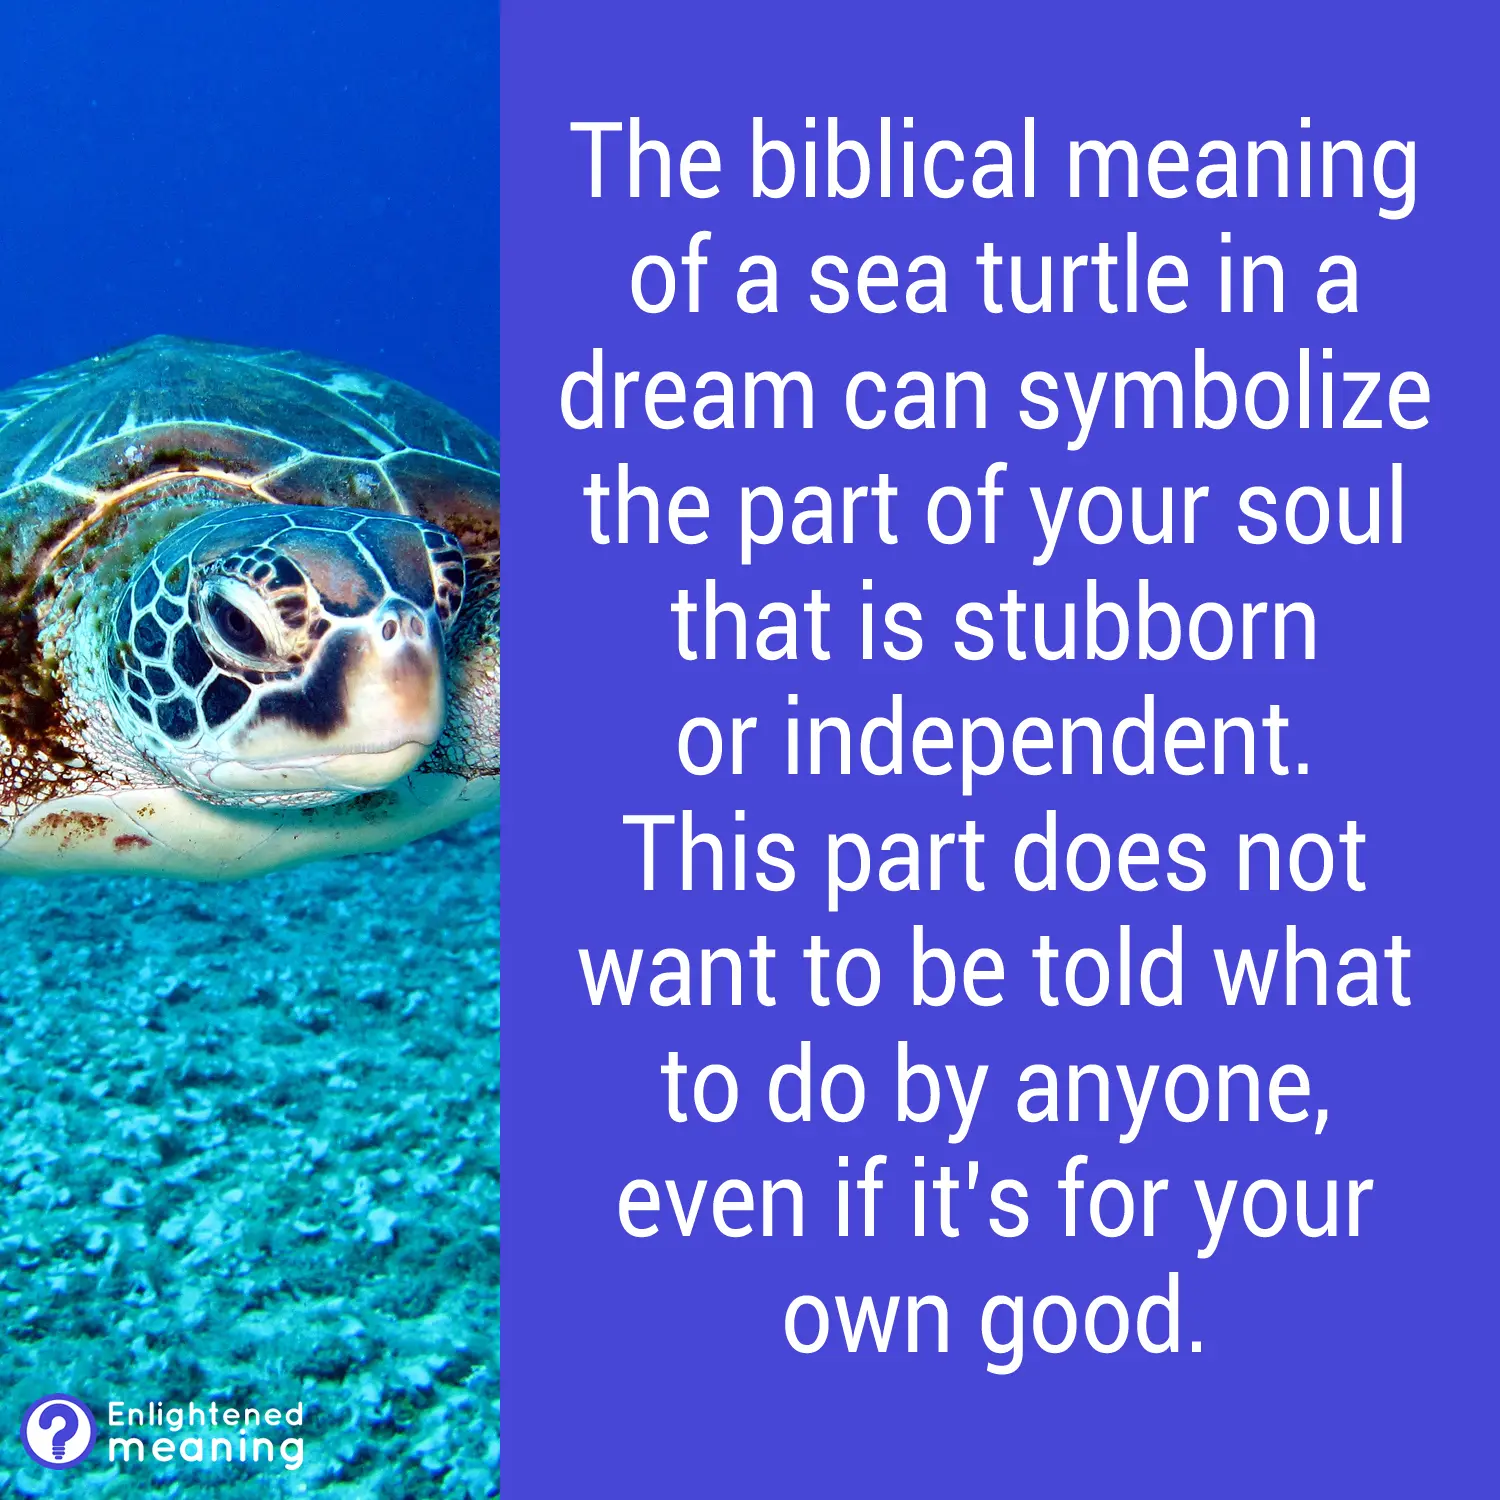 Biblical Meaning of a Sea Turtle in a Dream